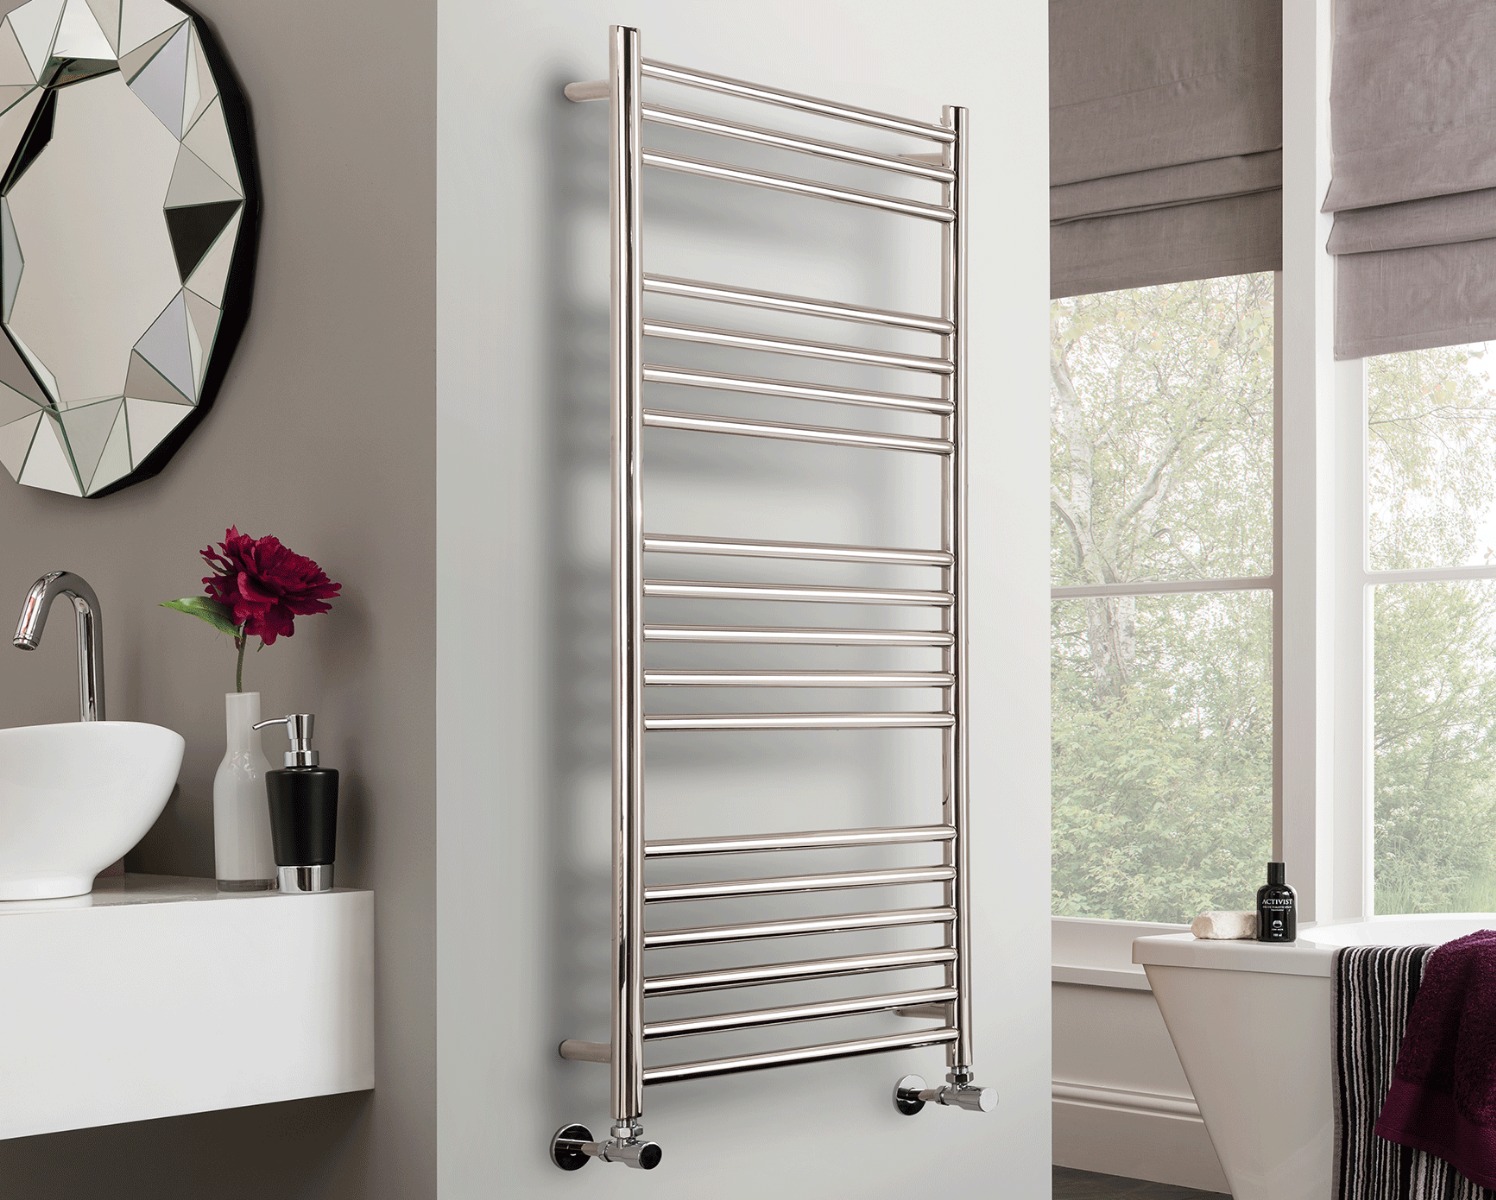 Ladder Rails Chube Heating Only - Polished Stainless Steel 1200x400